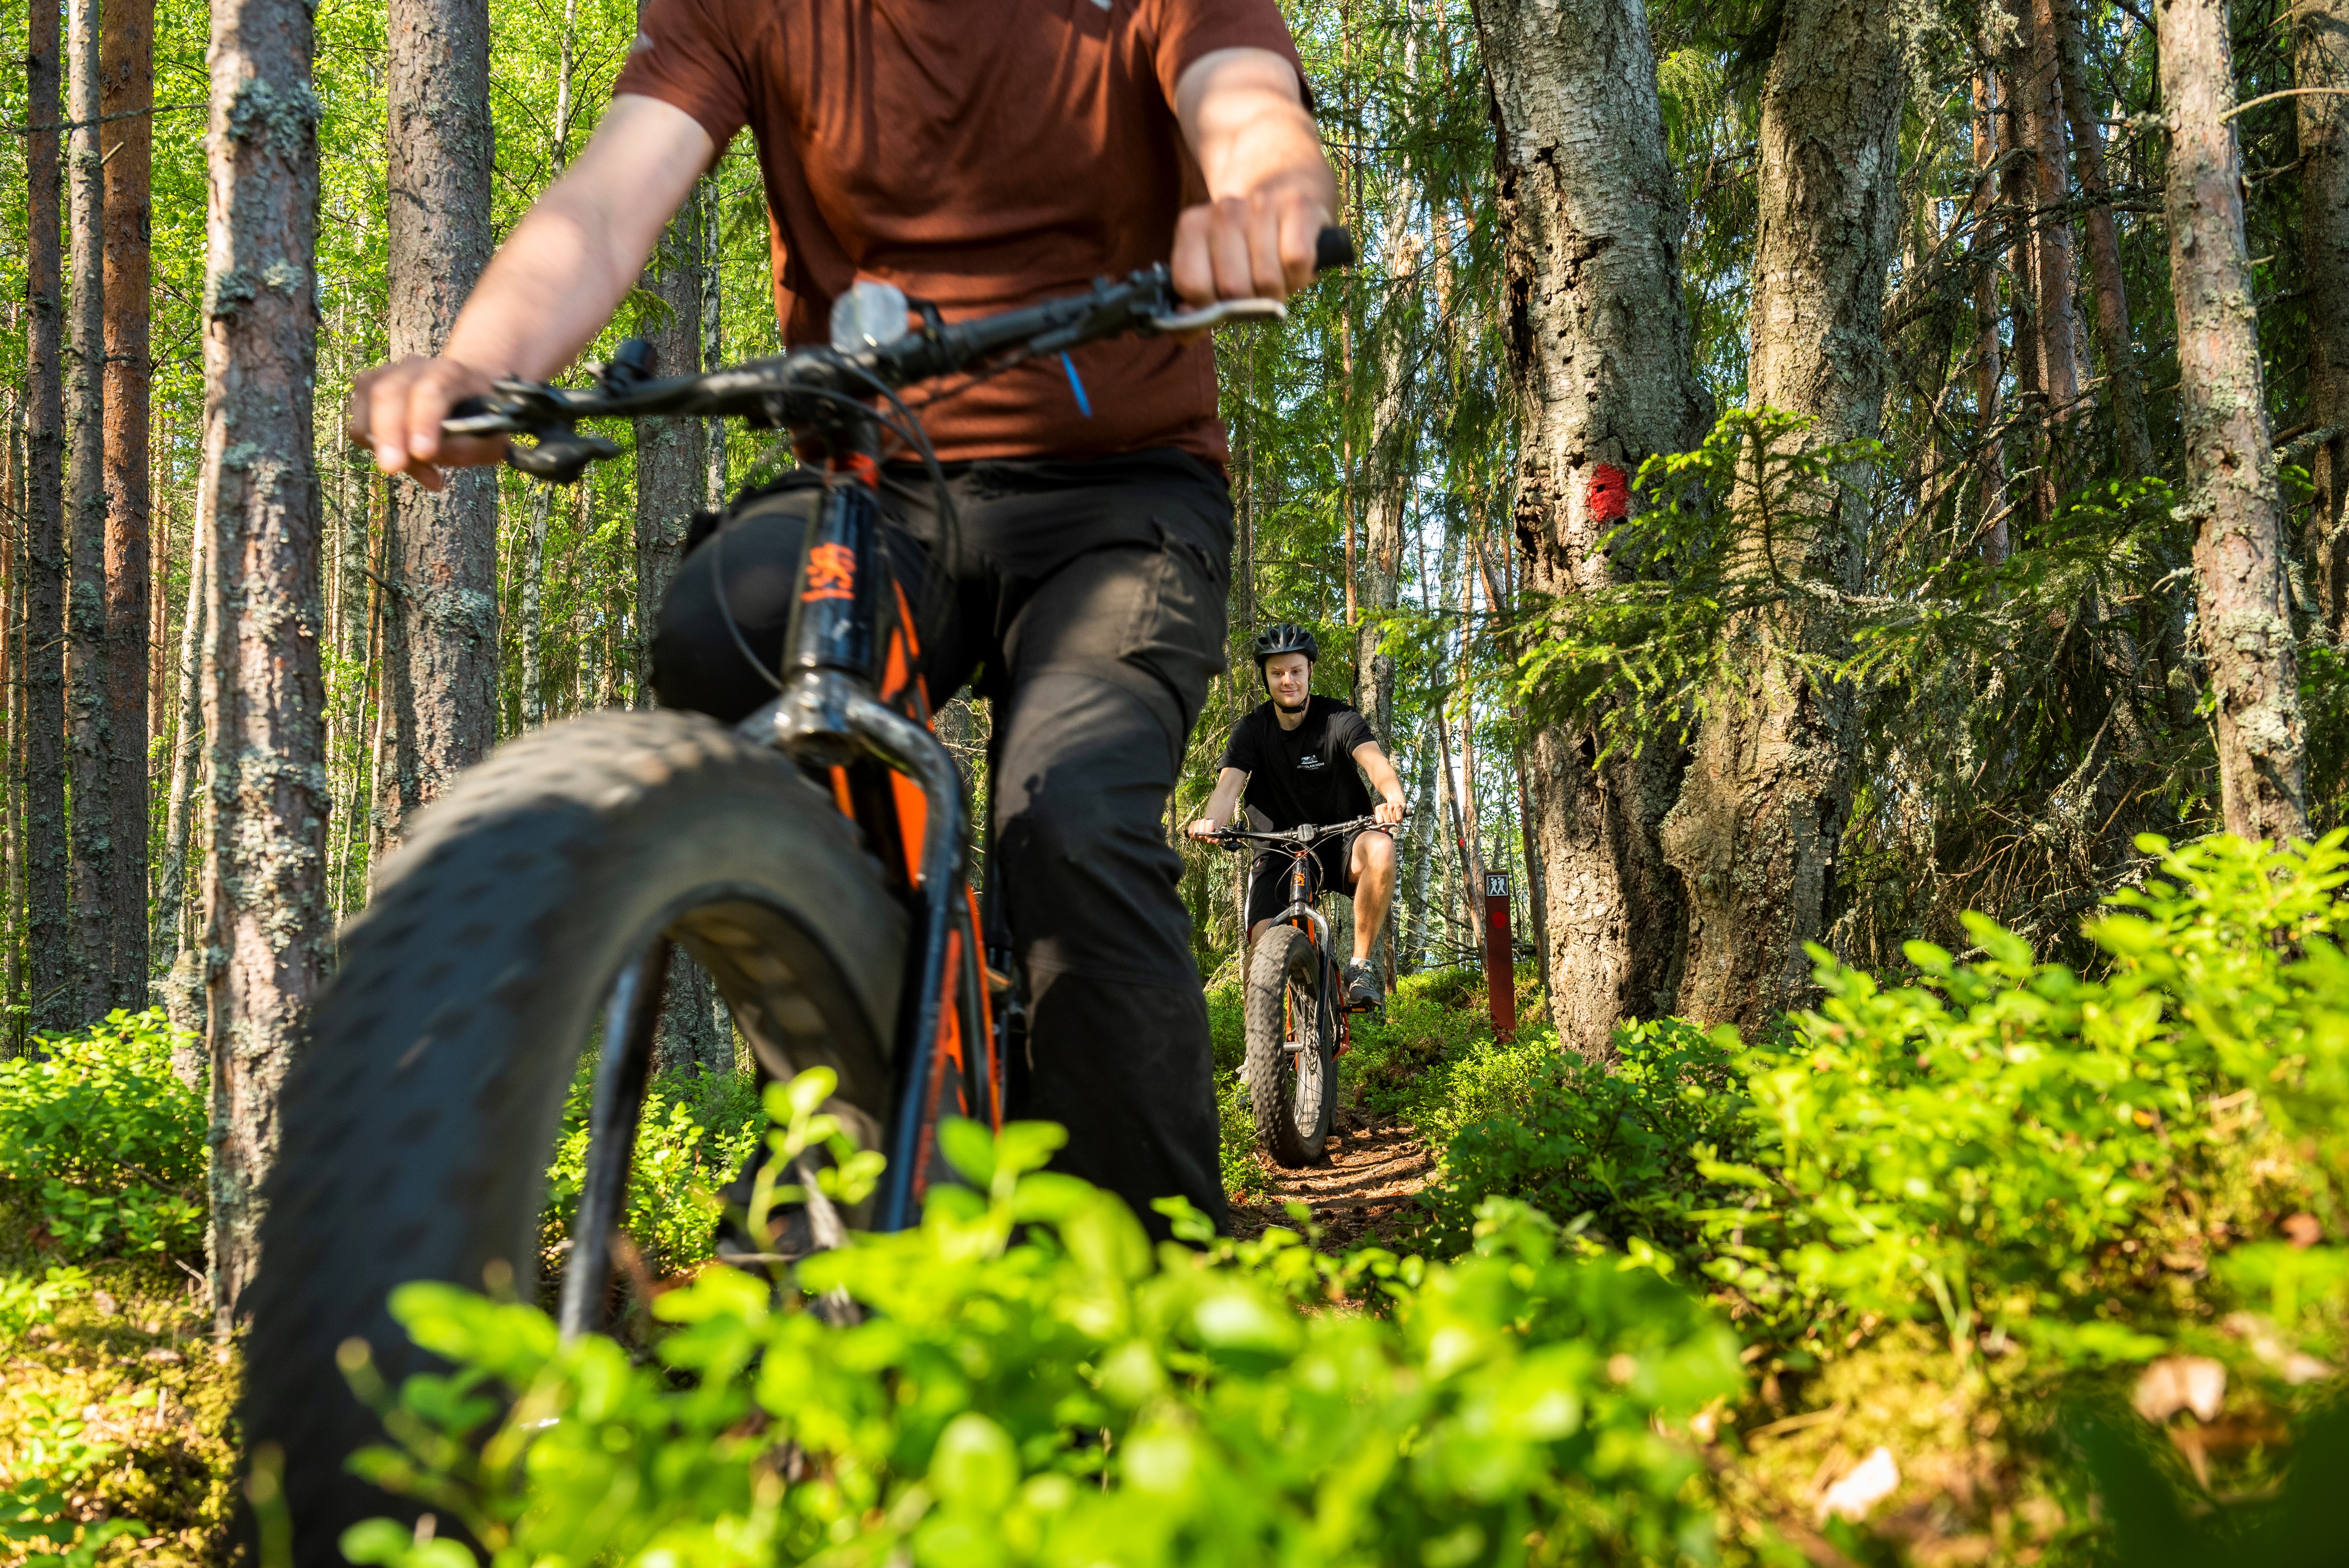 Two cyclists are on the mountain biking trail.